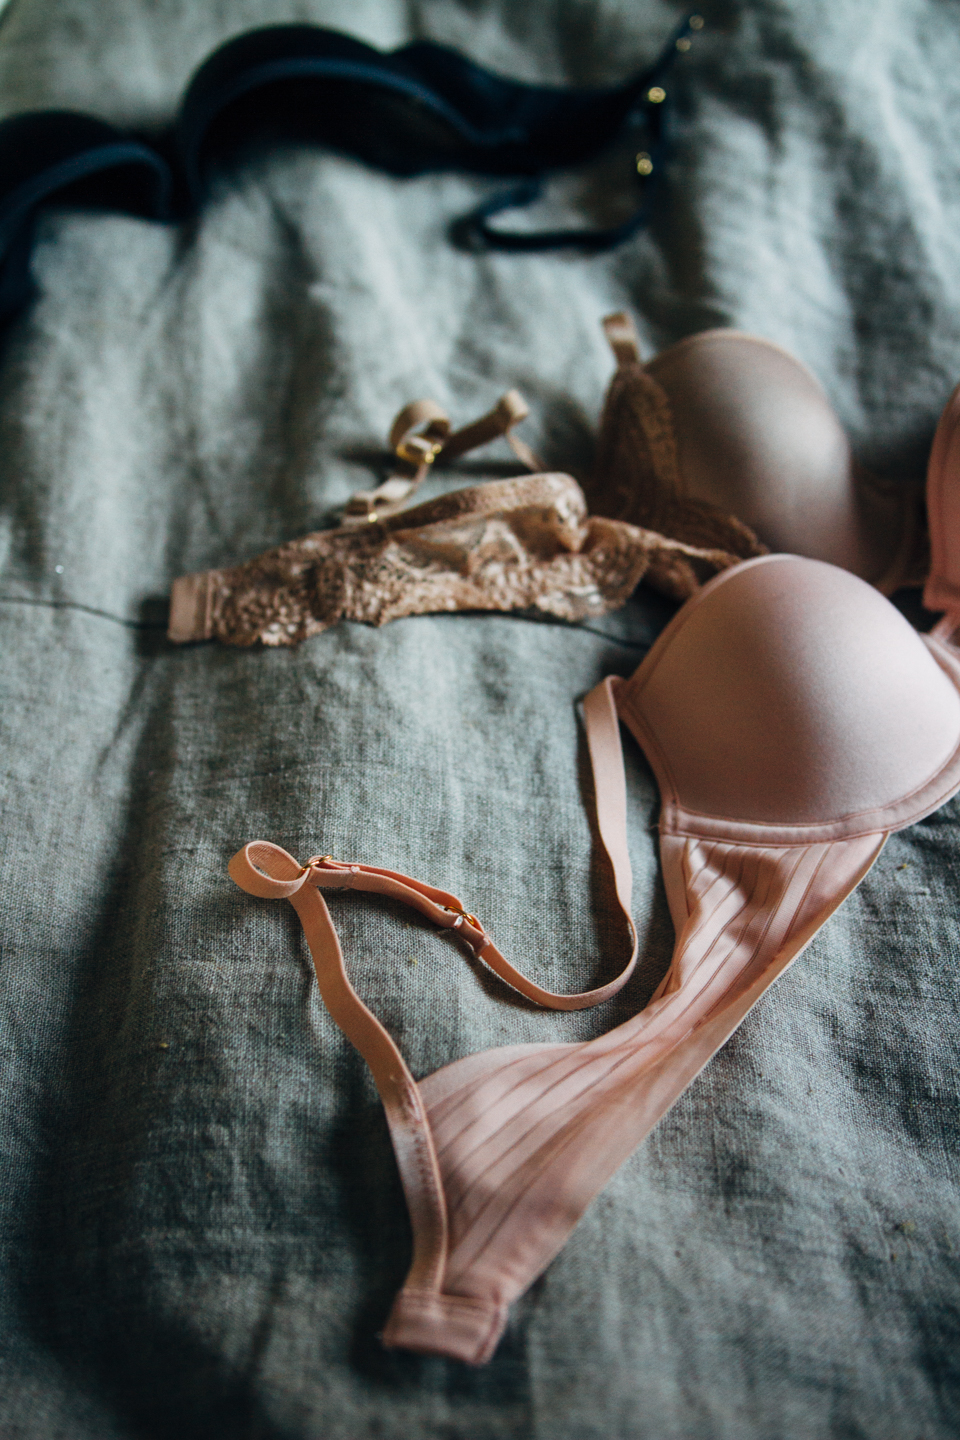 Time to treat yourself to a new bra, you DESERVE to be comfortable 💗